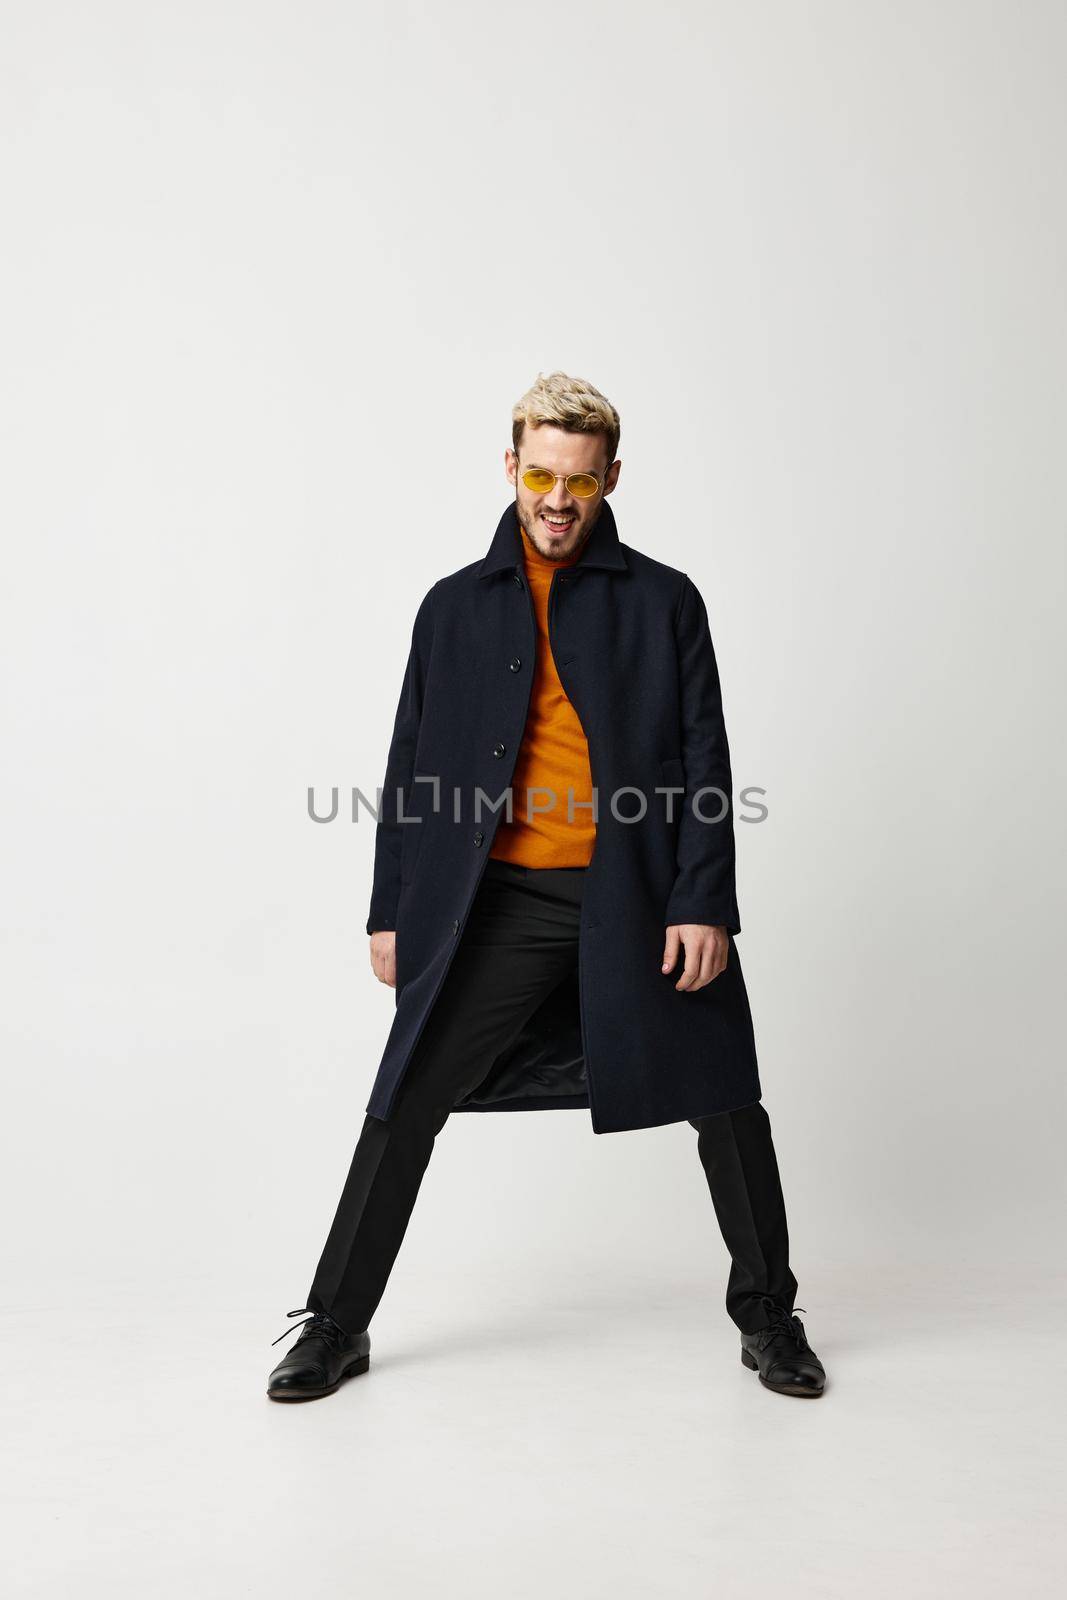 fashionable man in a coat spread his legs on a light background and orange sweater pants shoes. High quality photo